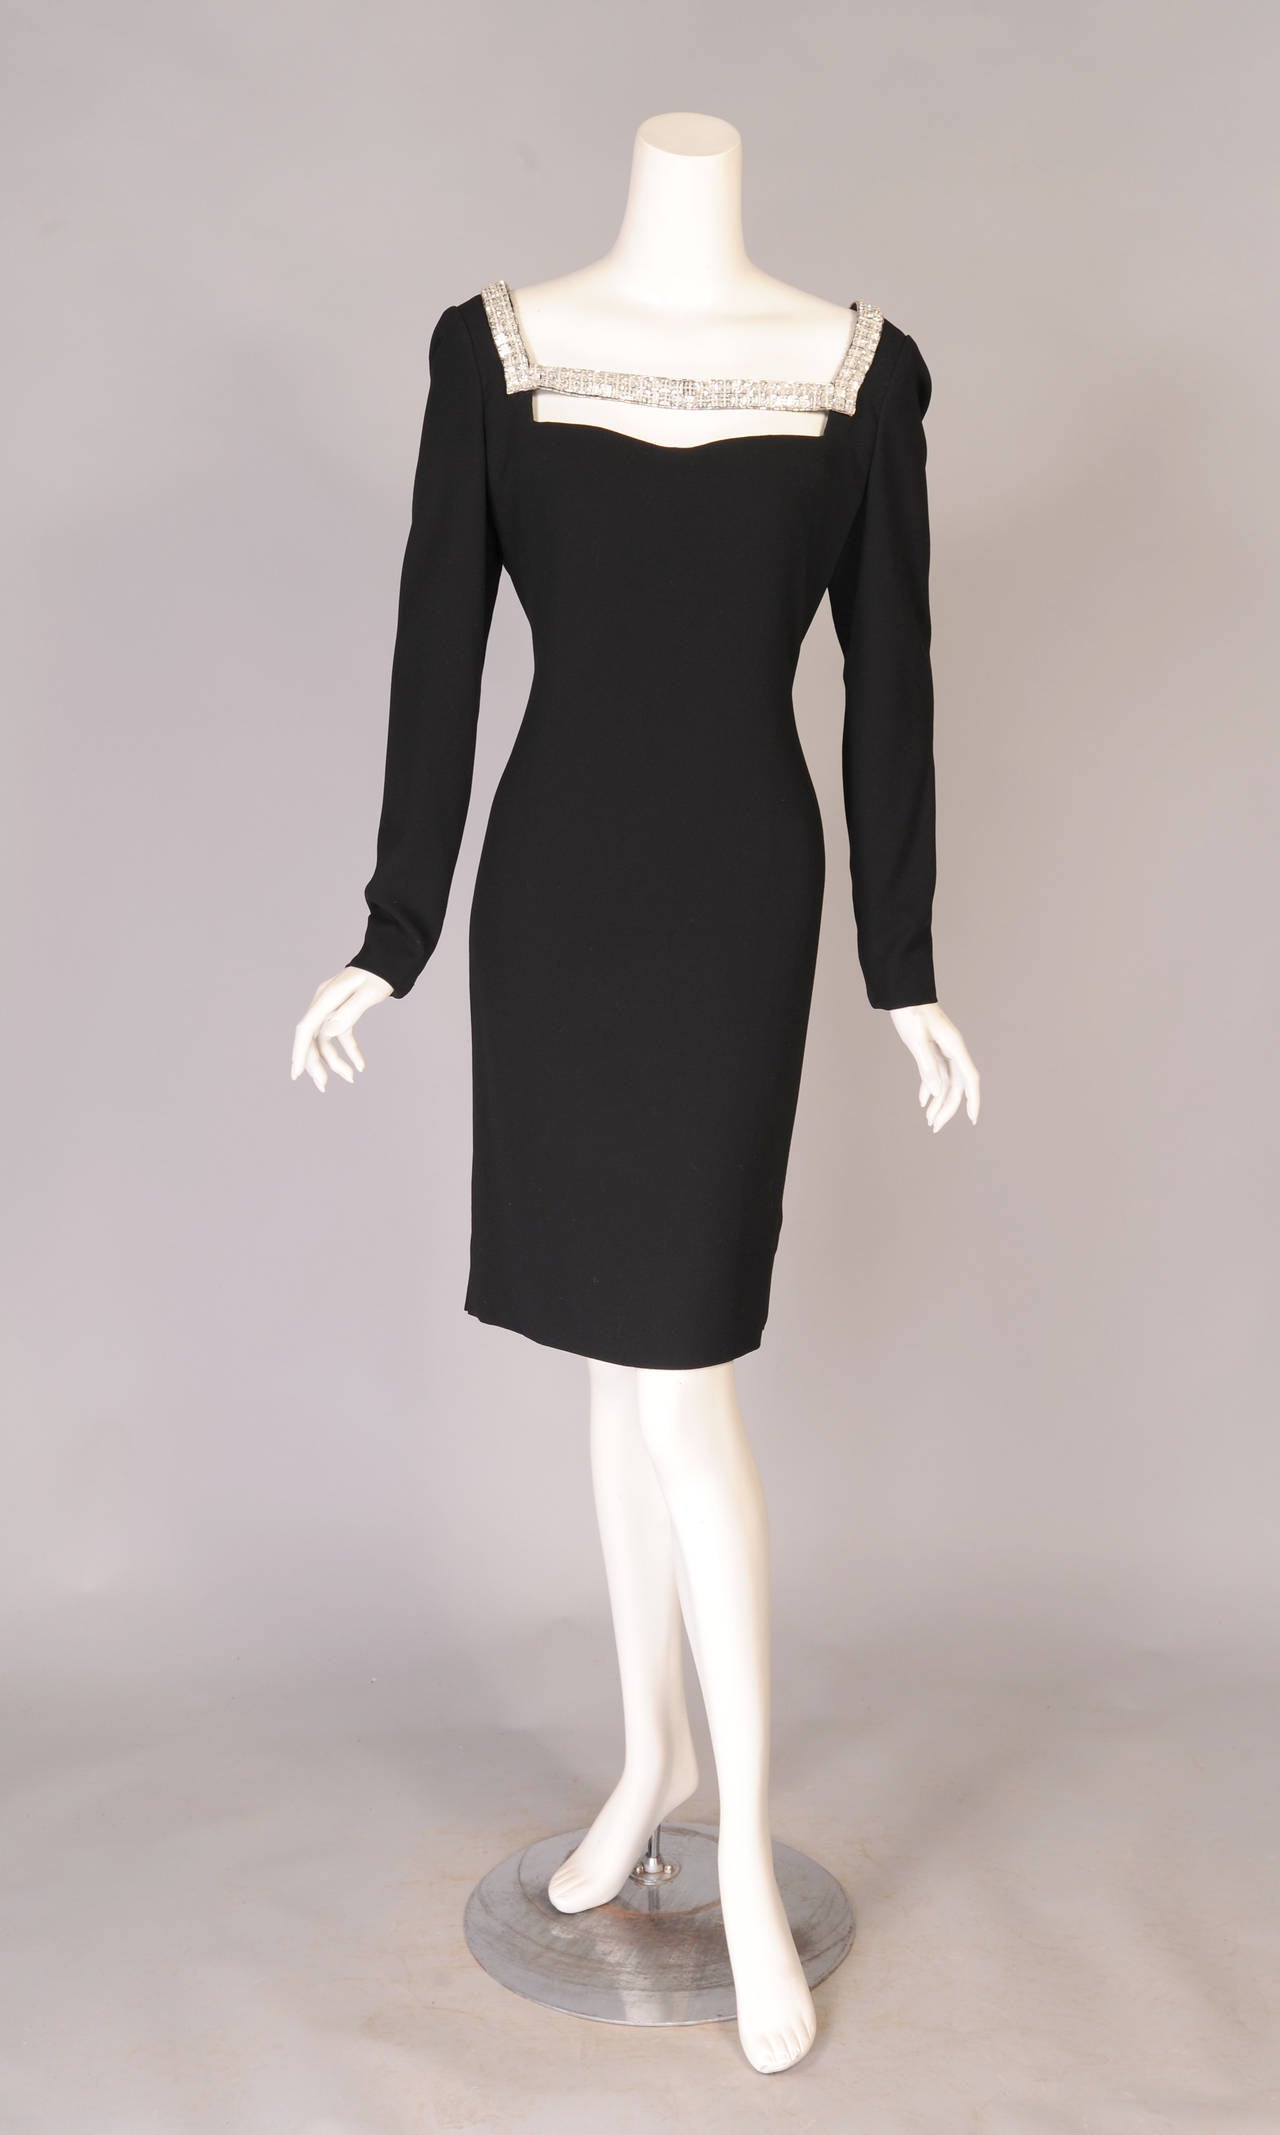 Black silk crepe is used for this classically elegant long sleeved dress with a square neckline. The neckline is enhanced with a double row of sparkling faceted 